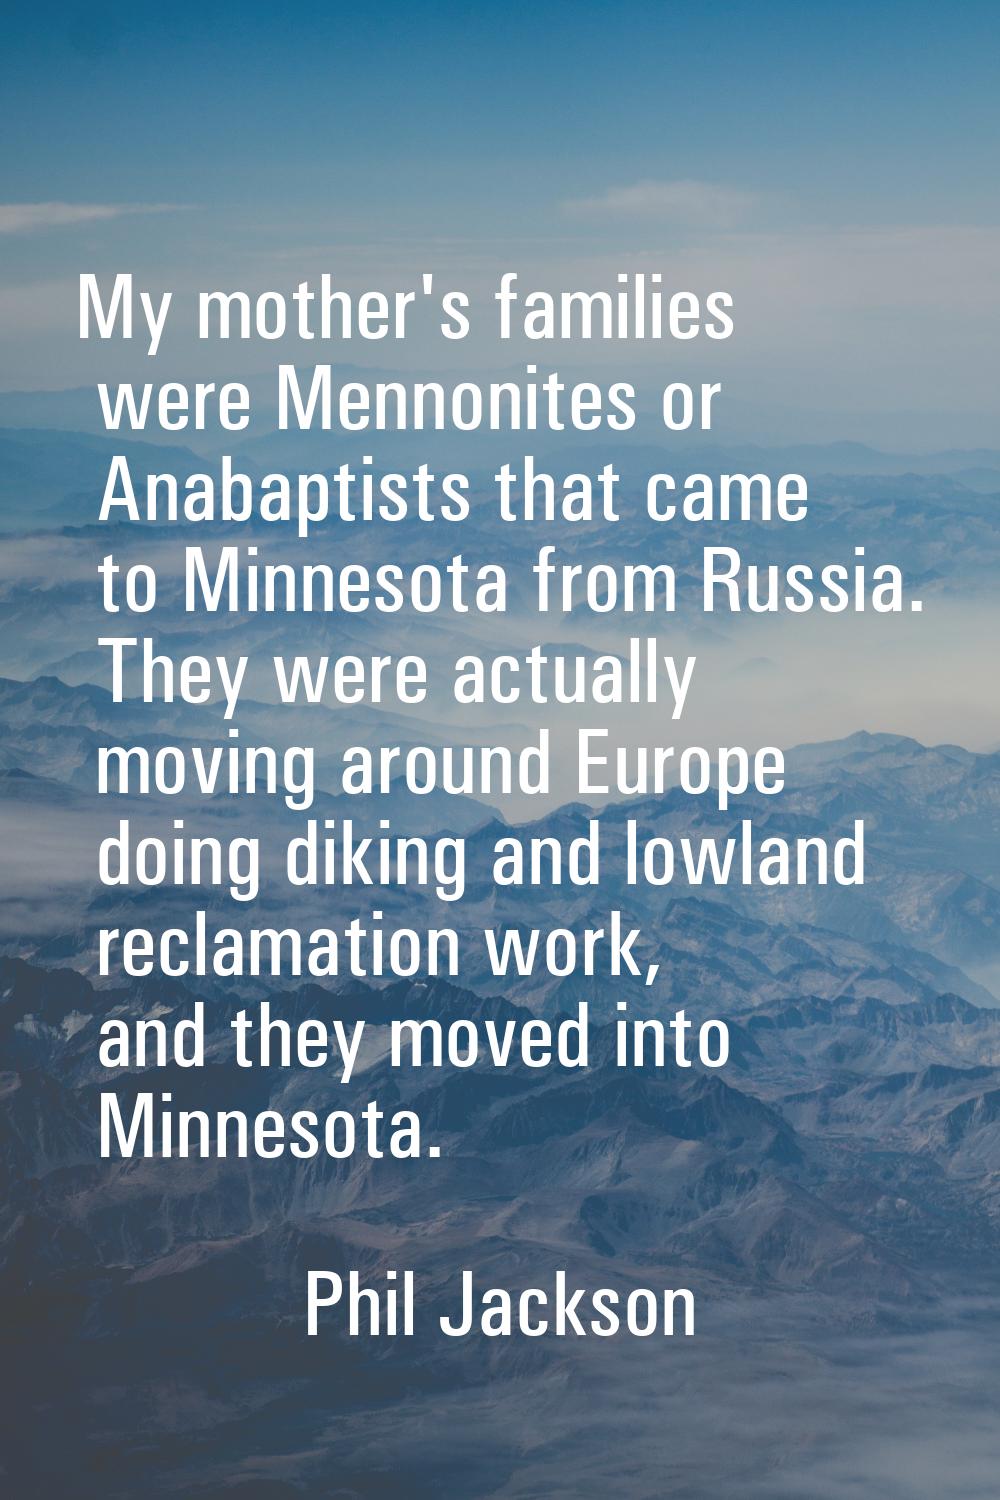 My mother's families were Mennonites or Anabaptists that came to Minnesota from Russia. They were a